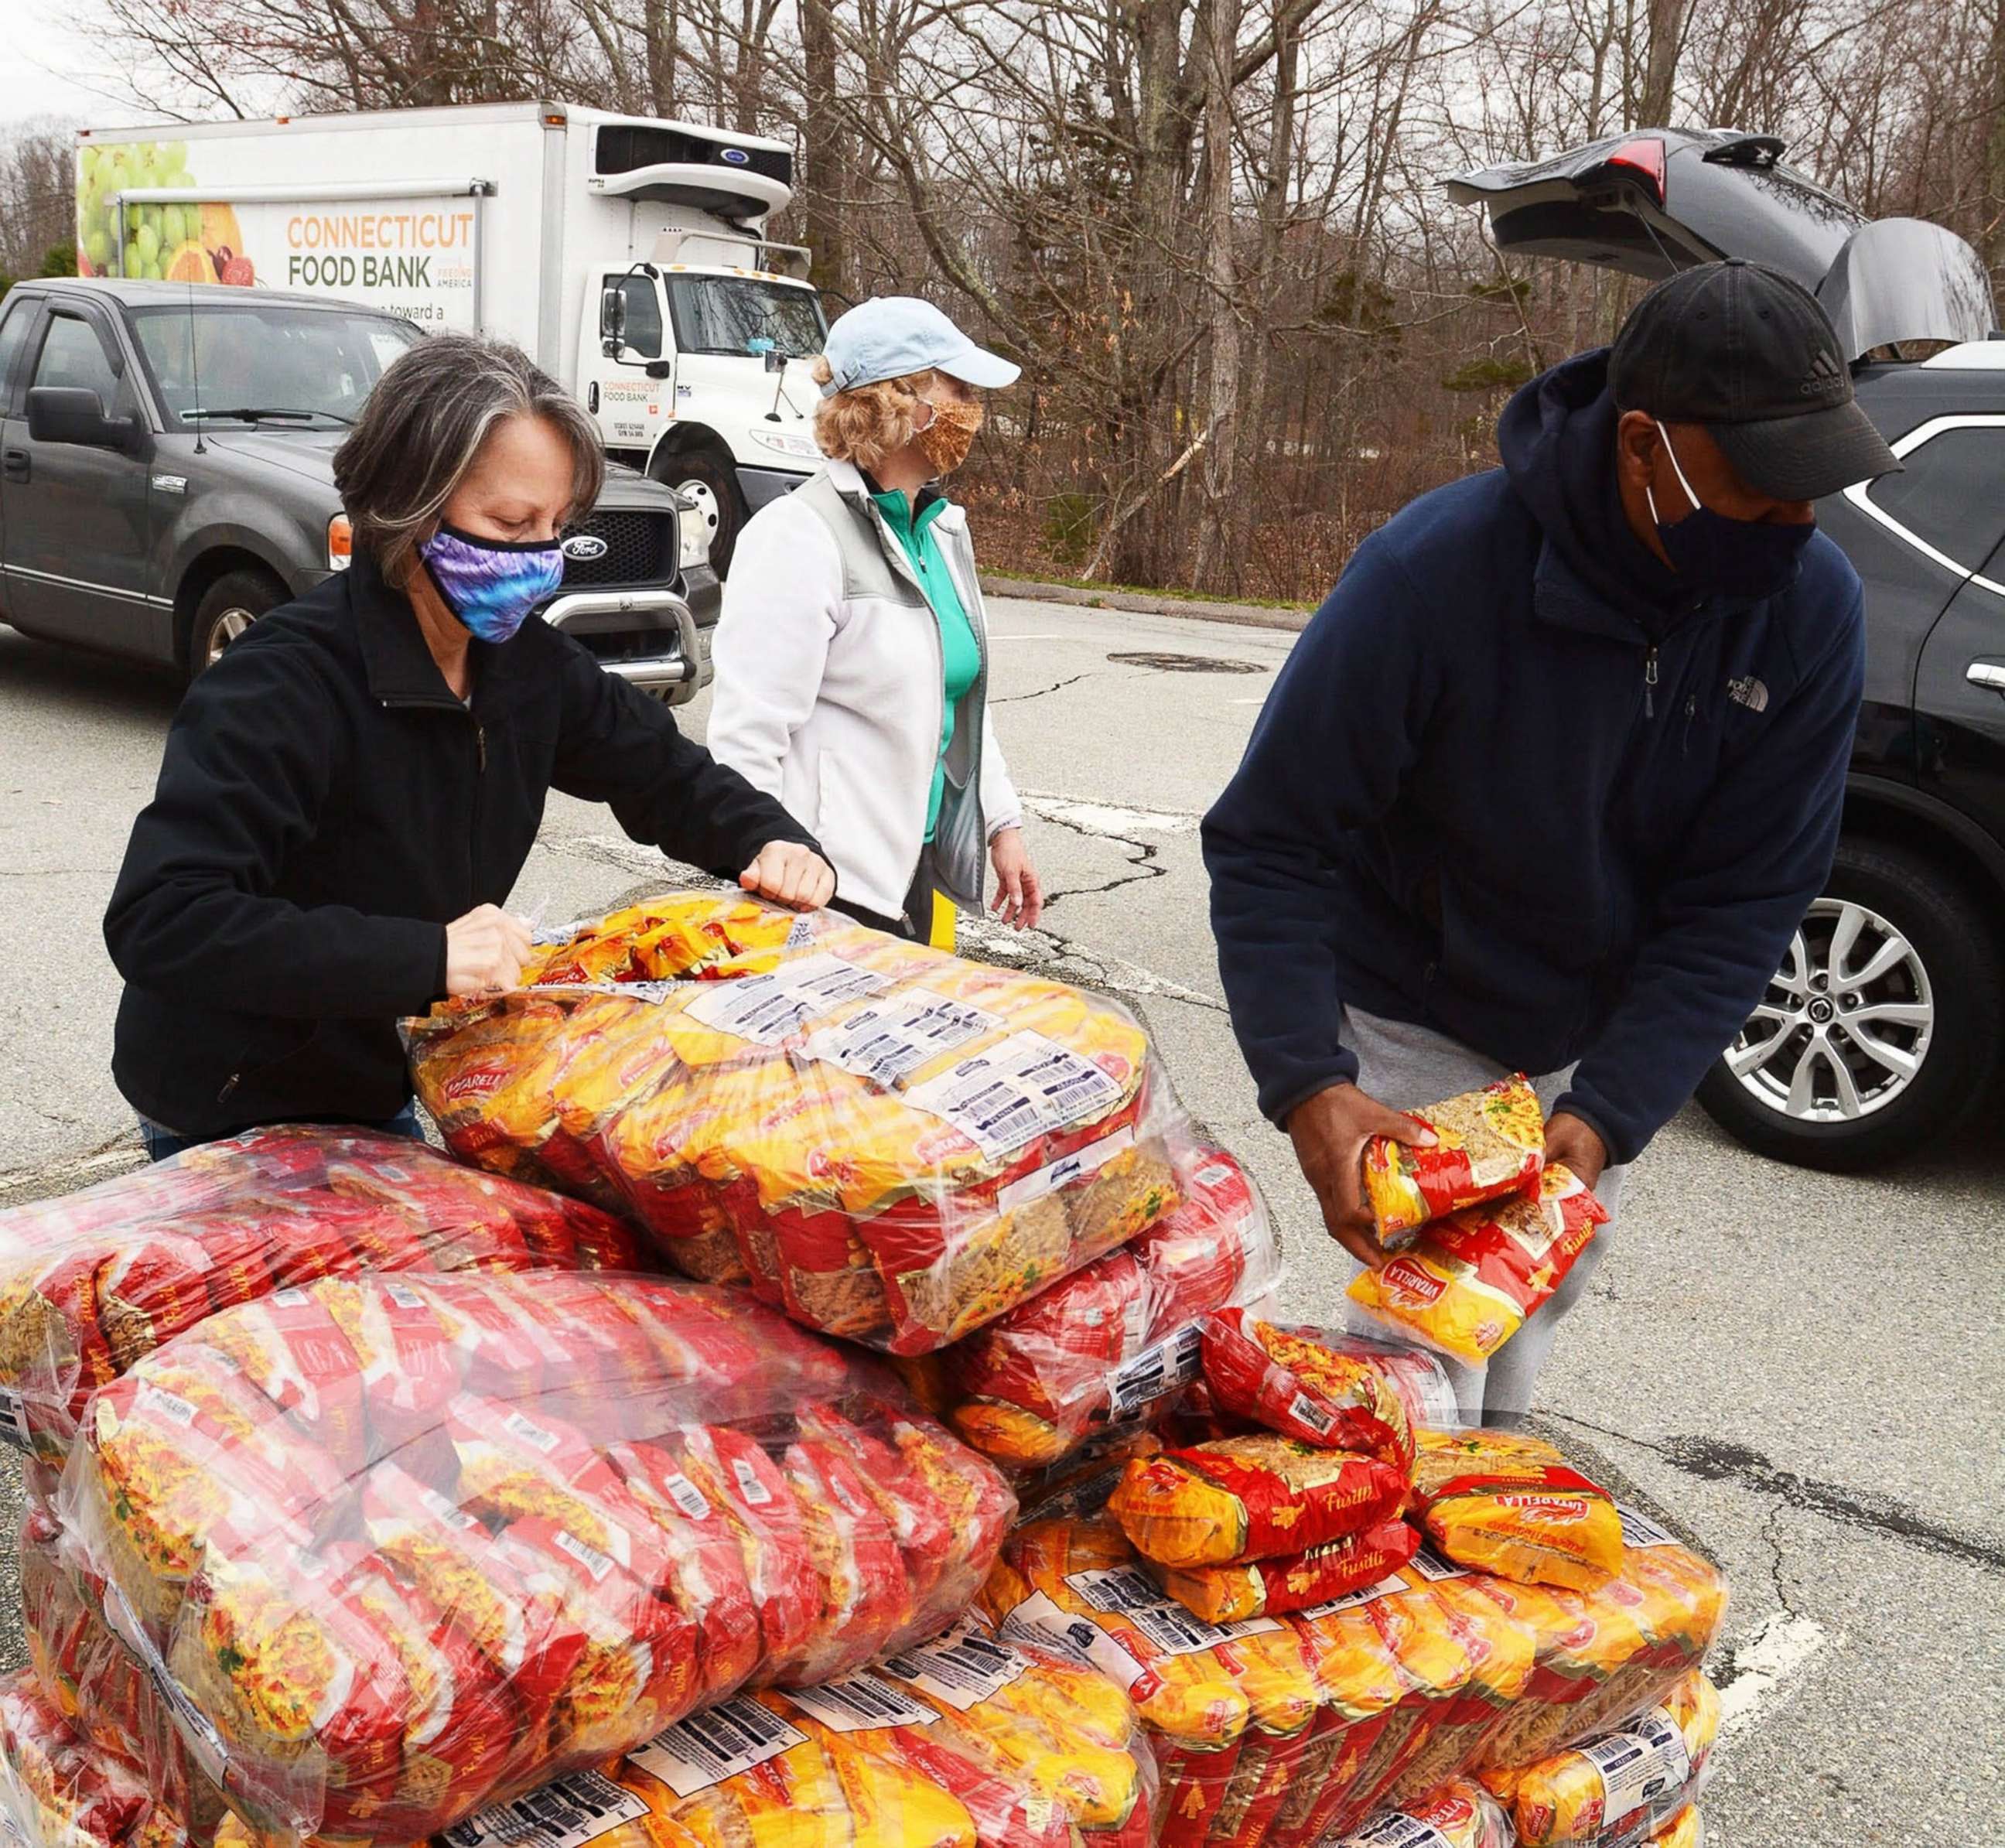 PHOTO: Volunteers load pasta into cars during the Connecticut Food Bank's weekly food distribution in the Foxwoods employee parking in Norwich, Conn., April 12, 2021.